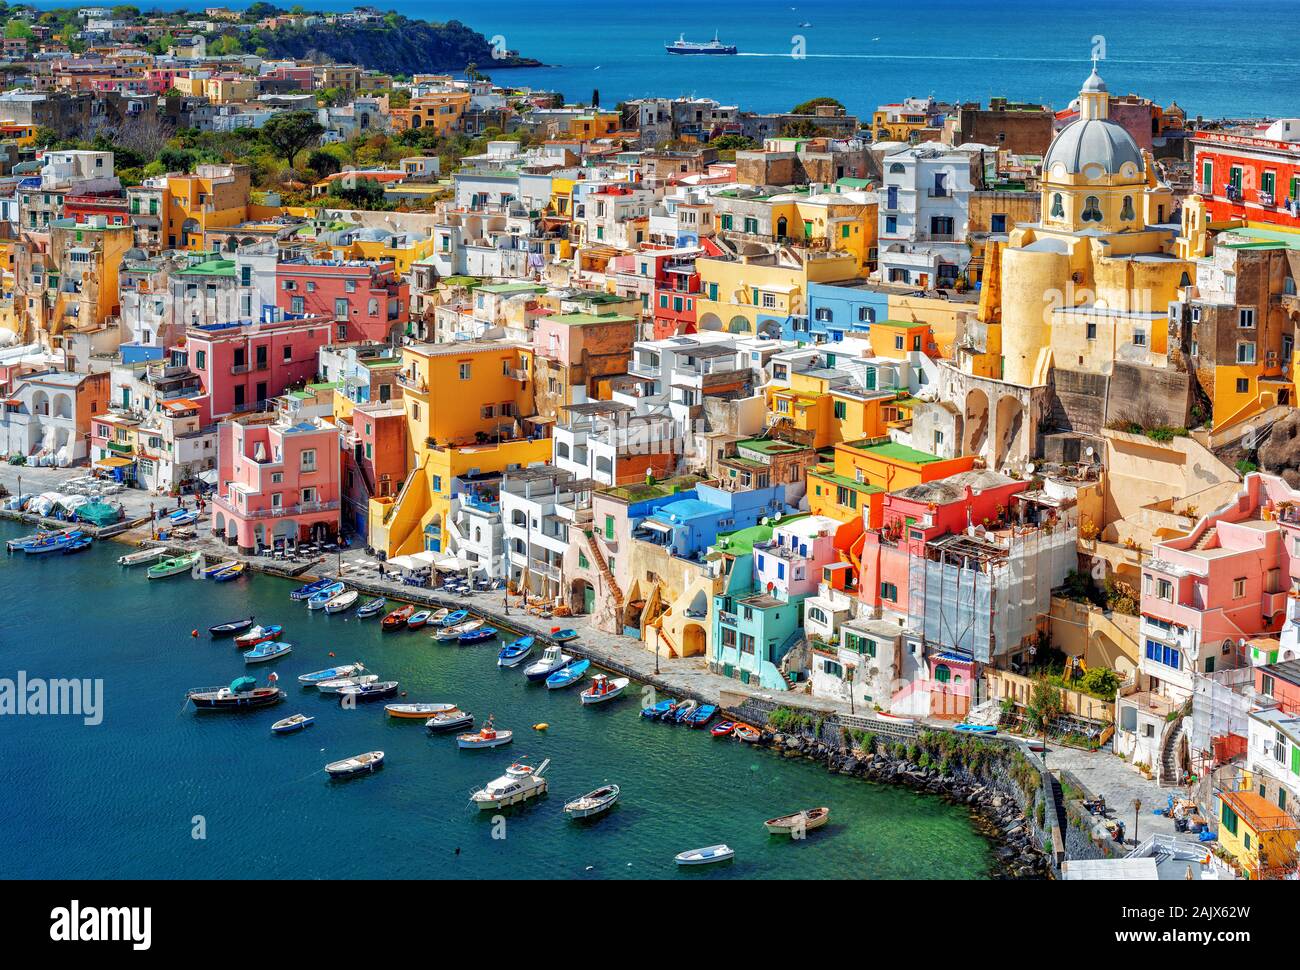 Colorful traditional houses in the Old town port of Procida island, Naples, Italy Stock Photo